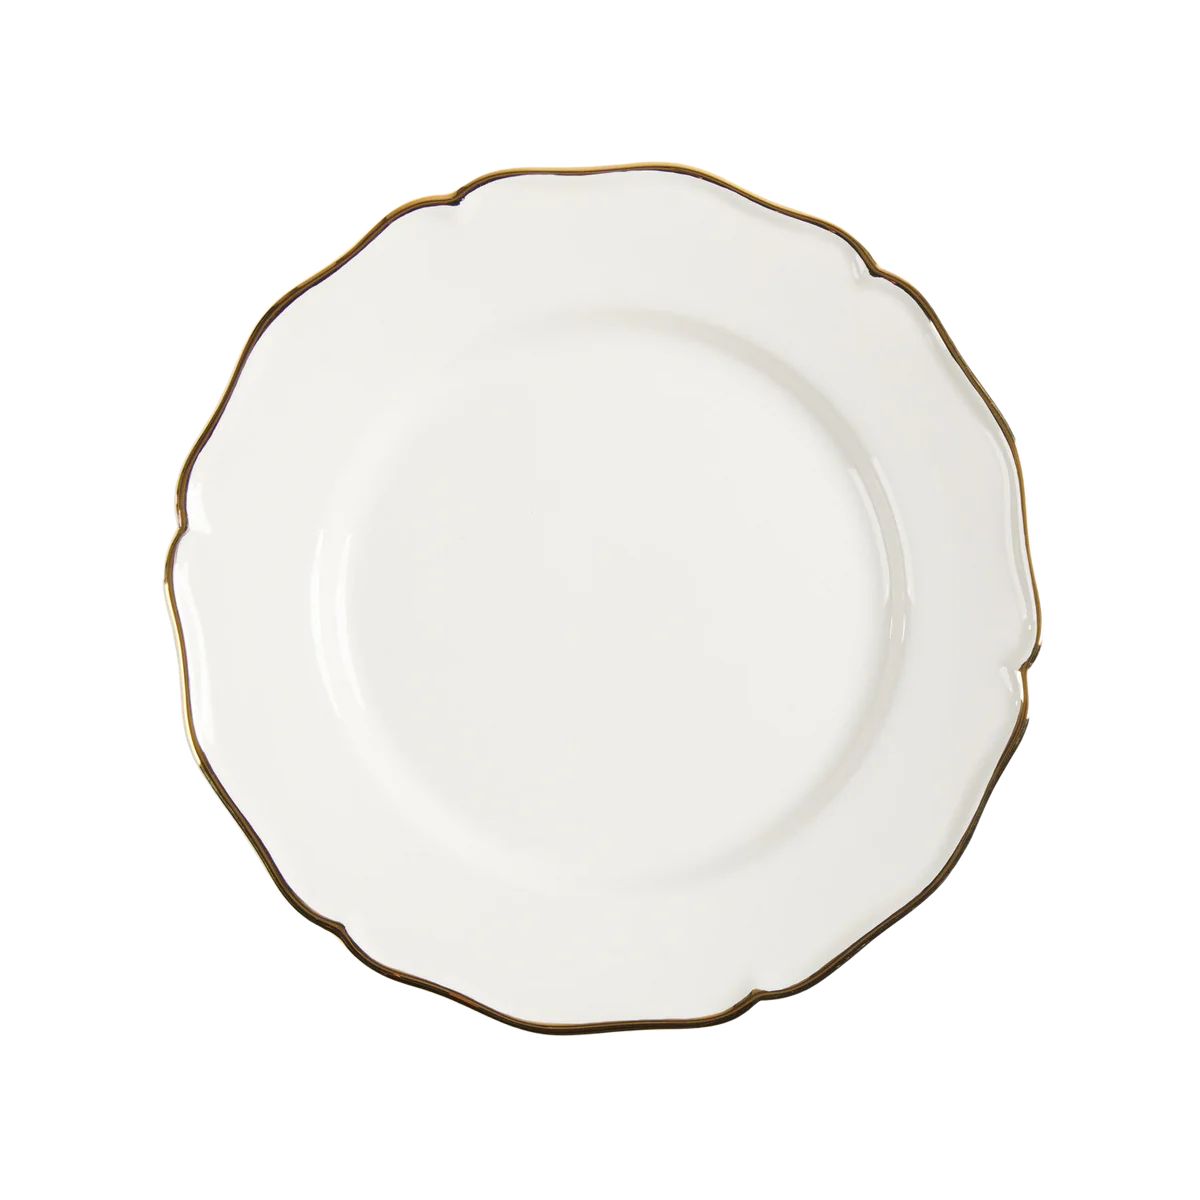 L'Horizon d’Or Dinner Plate | Over The Moon